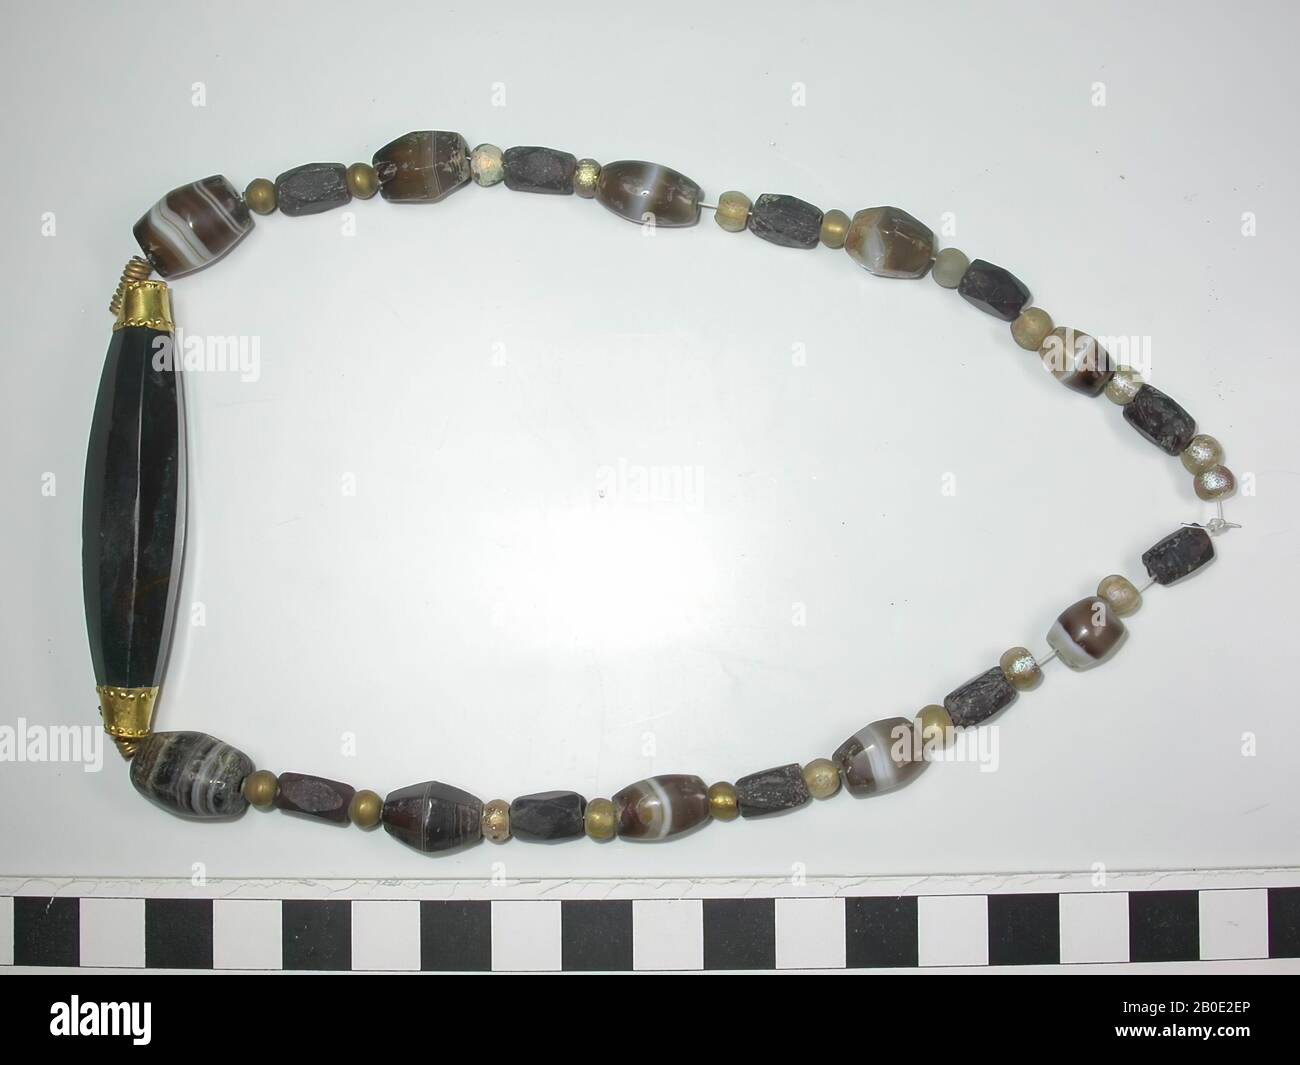 Necklace of round, barrel-shaped, polygonal and yet other beads of glass, stone and gold. Fully symmetrical of construction. 16 small round beads of colorless, but gold-yellow iridescent glass, 10 polygonal beads of dull black stone, 8 barrel-shaped beads of brown and white sardonyx like layered stone, 2 polygonal beads of the same kind of stone and 4 small round golden beads with profiling on top and bottom. Finally, after 2 elongated spiral golden beads, a very long polygonal bead of dark green stone in a middle setting with pressed pearl edges, rosettes and suspension eyes. All beads are Stock Photo